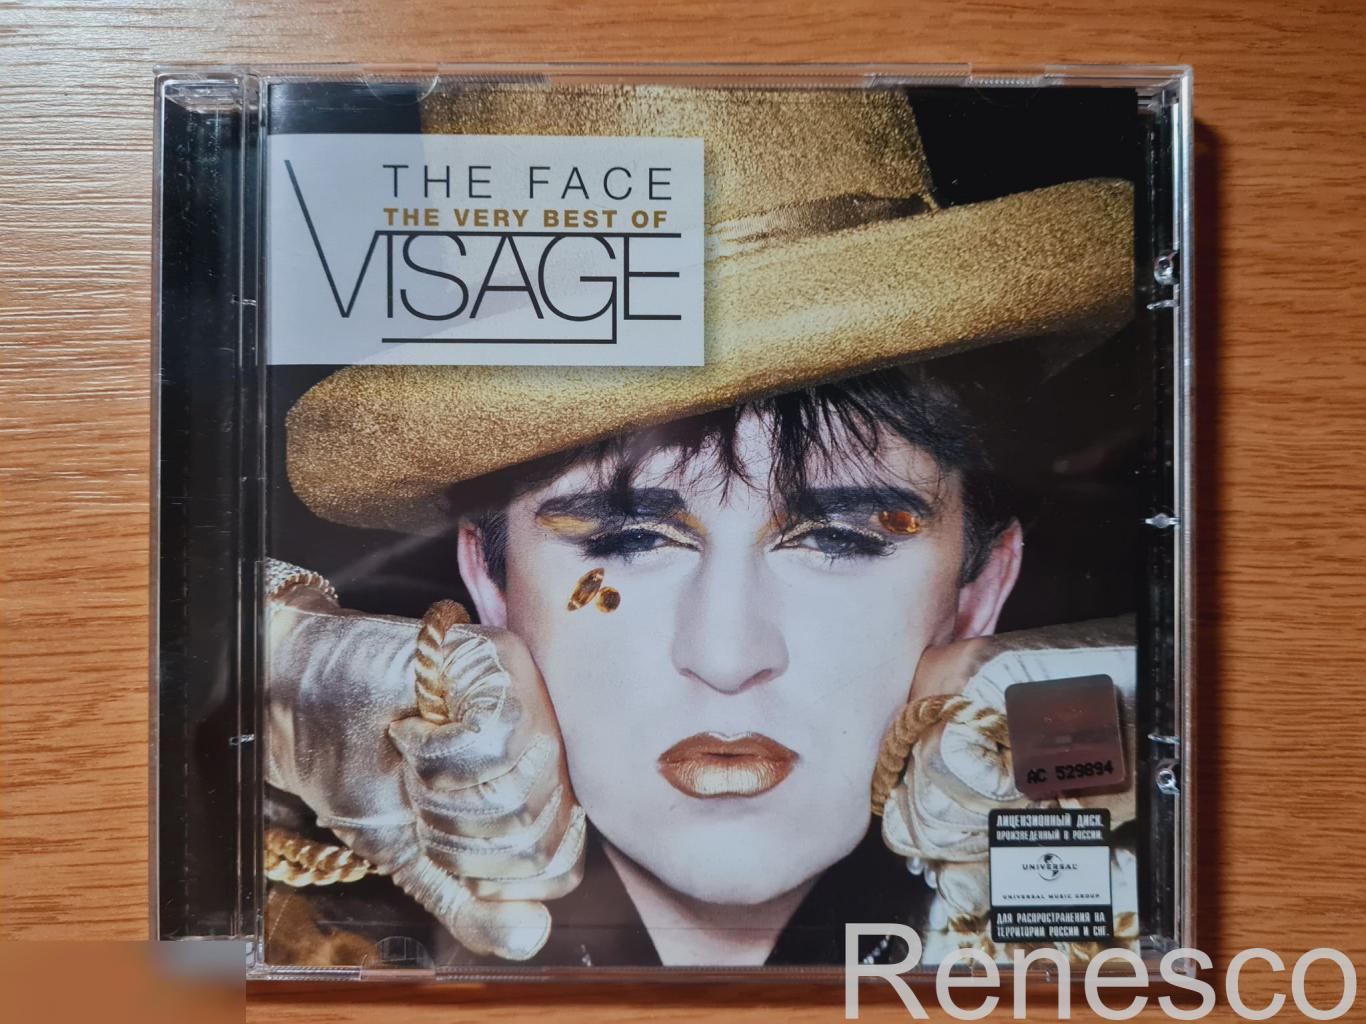 Visage ?– The Face (The Very Best Of Visage) (Russia) (2010)